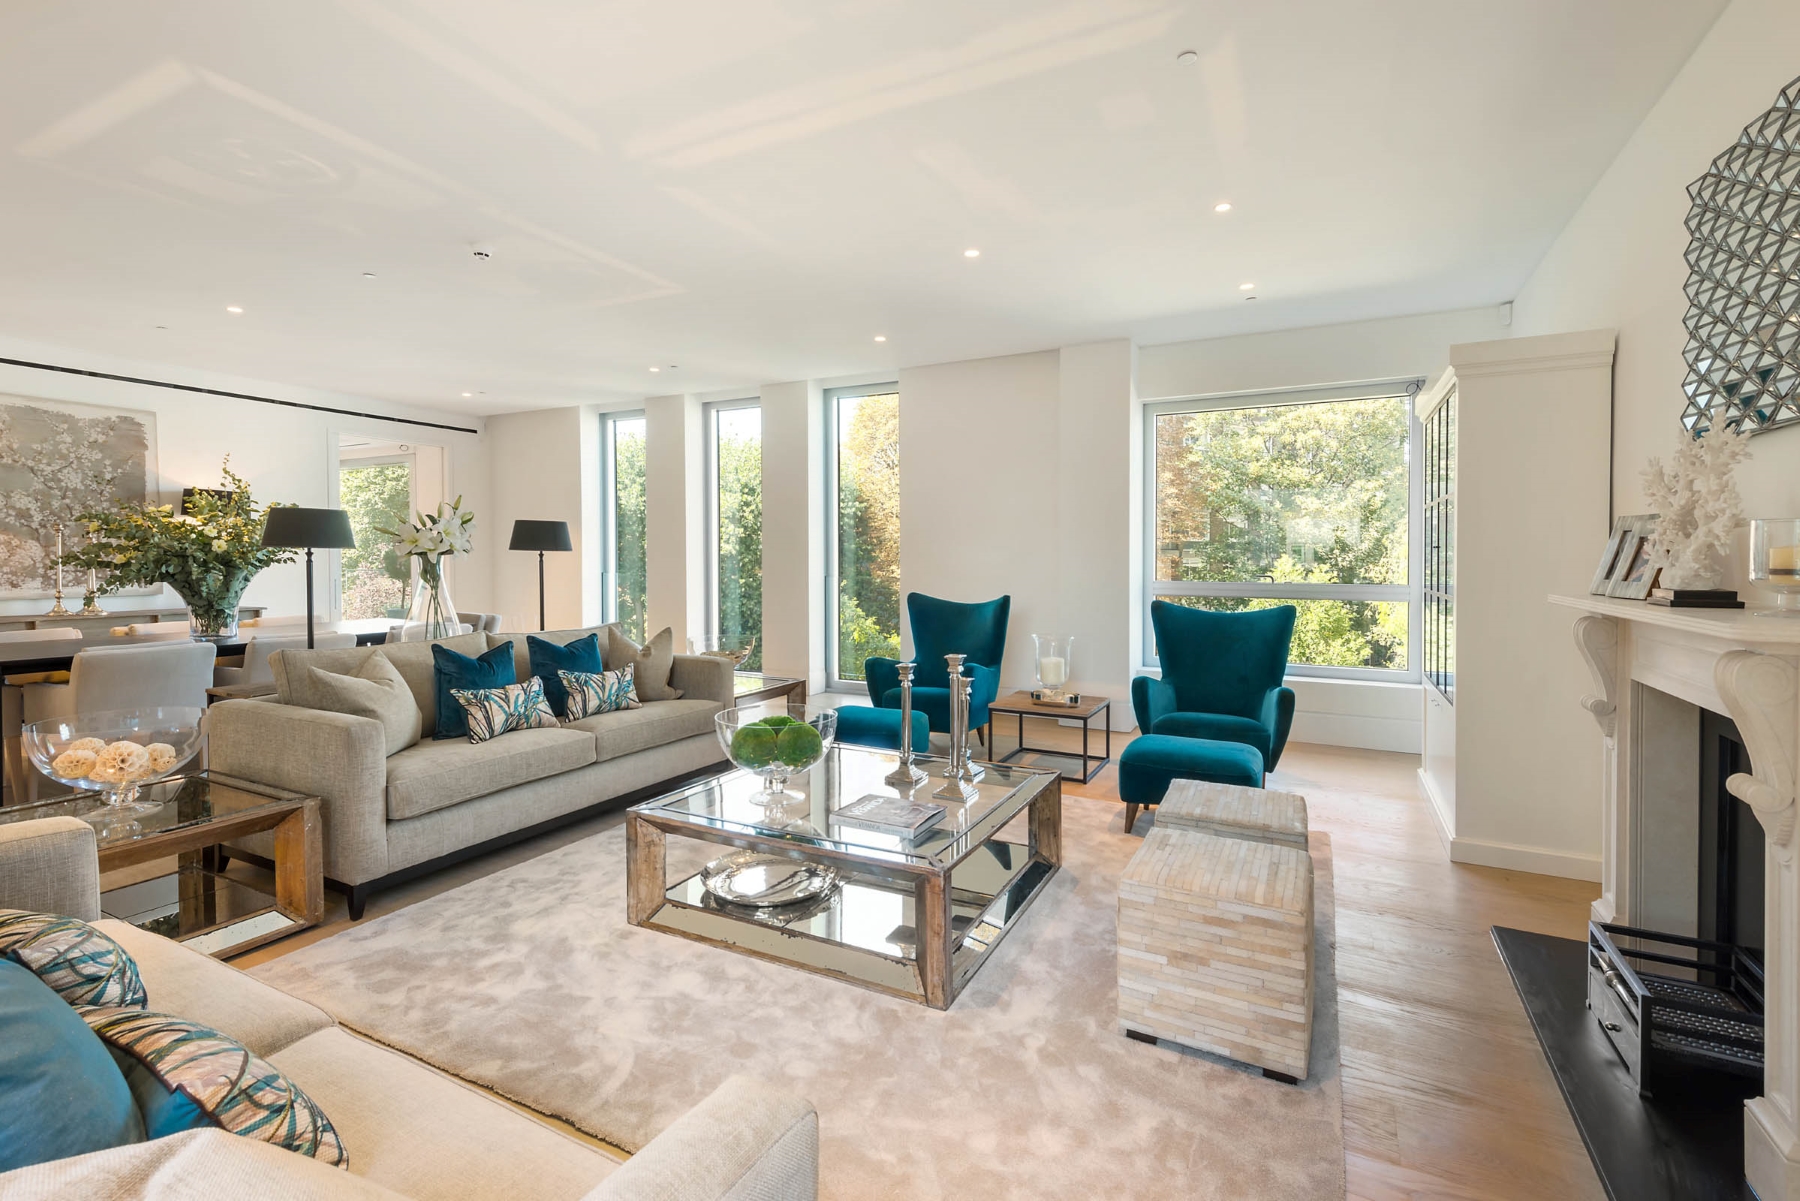 An stunning three bedroom apartment in one of London's most desirable locations